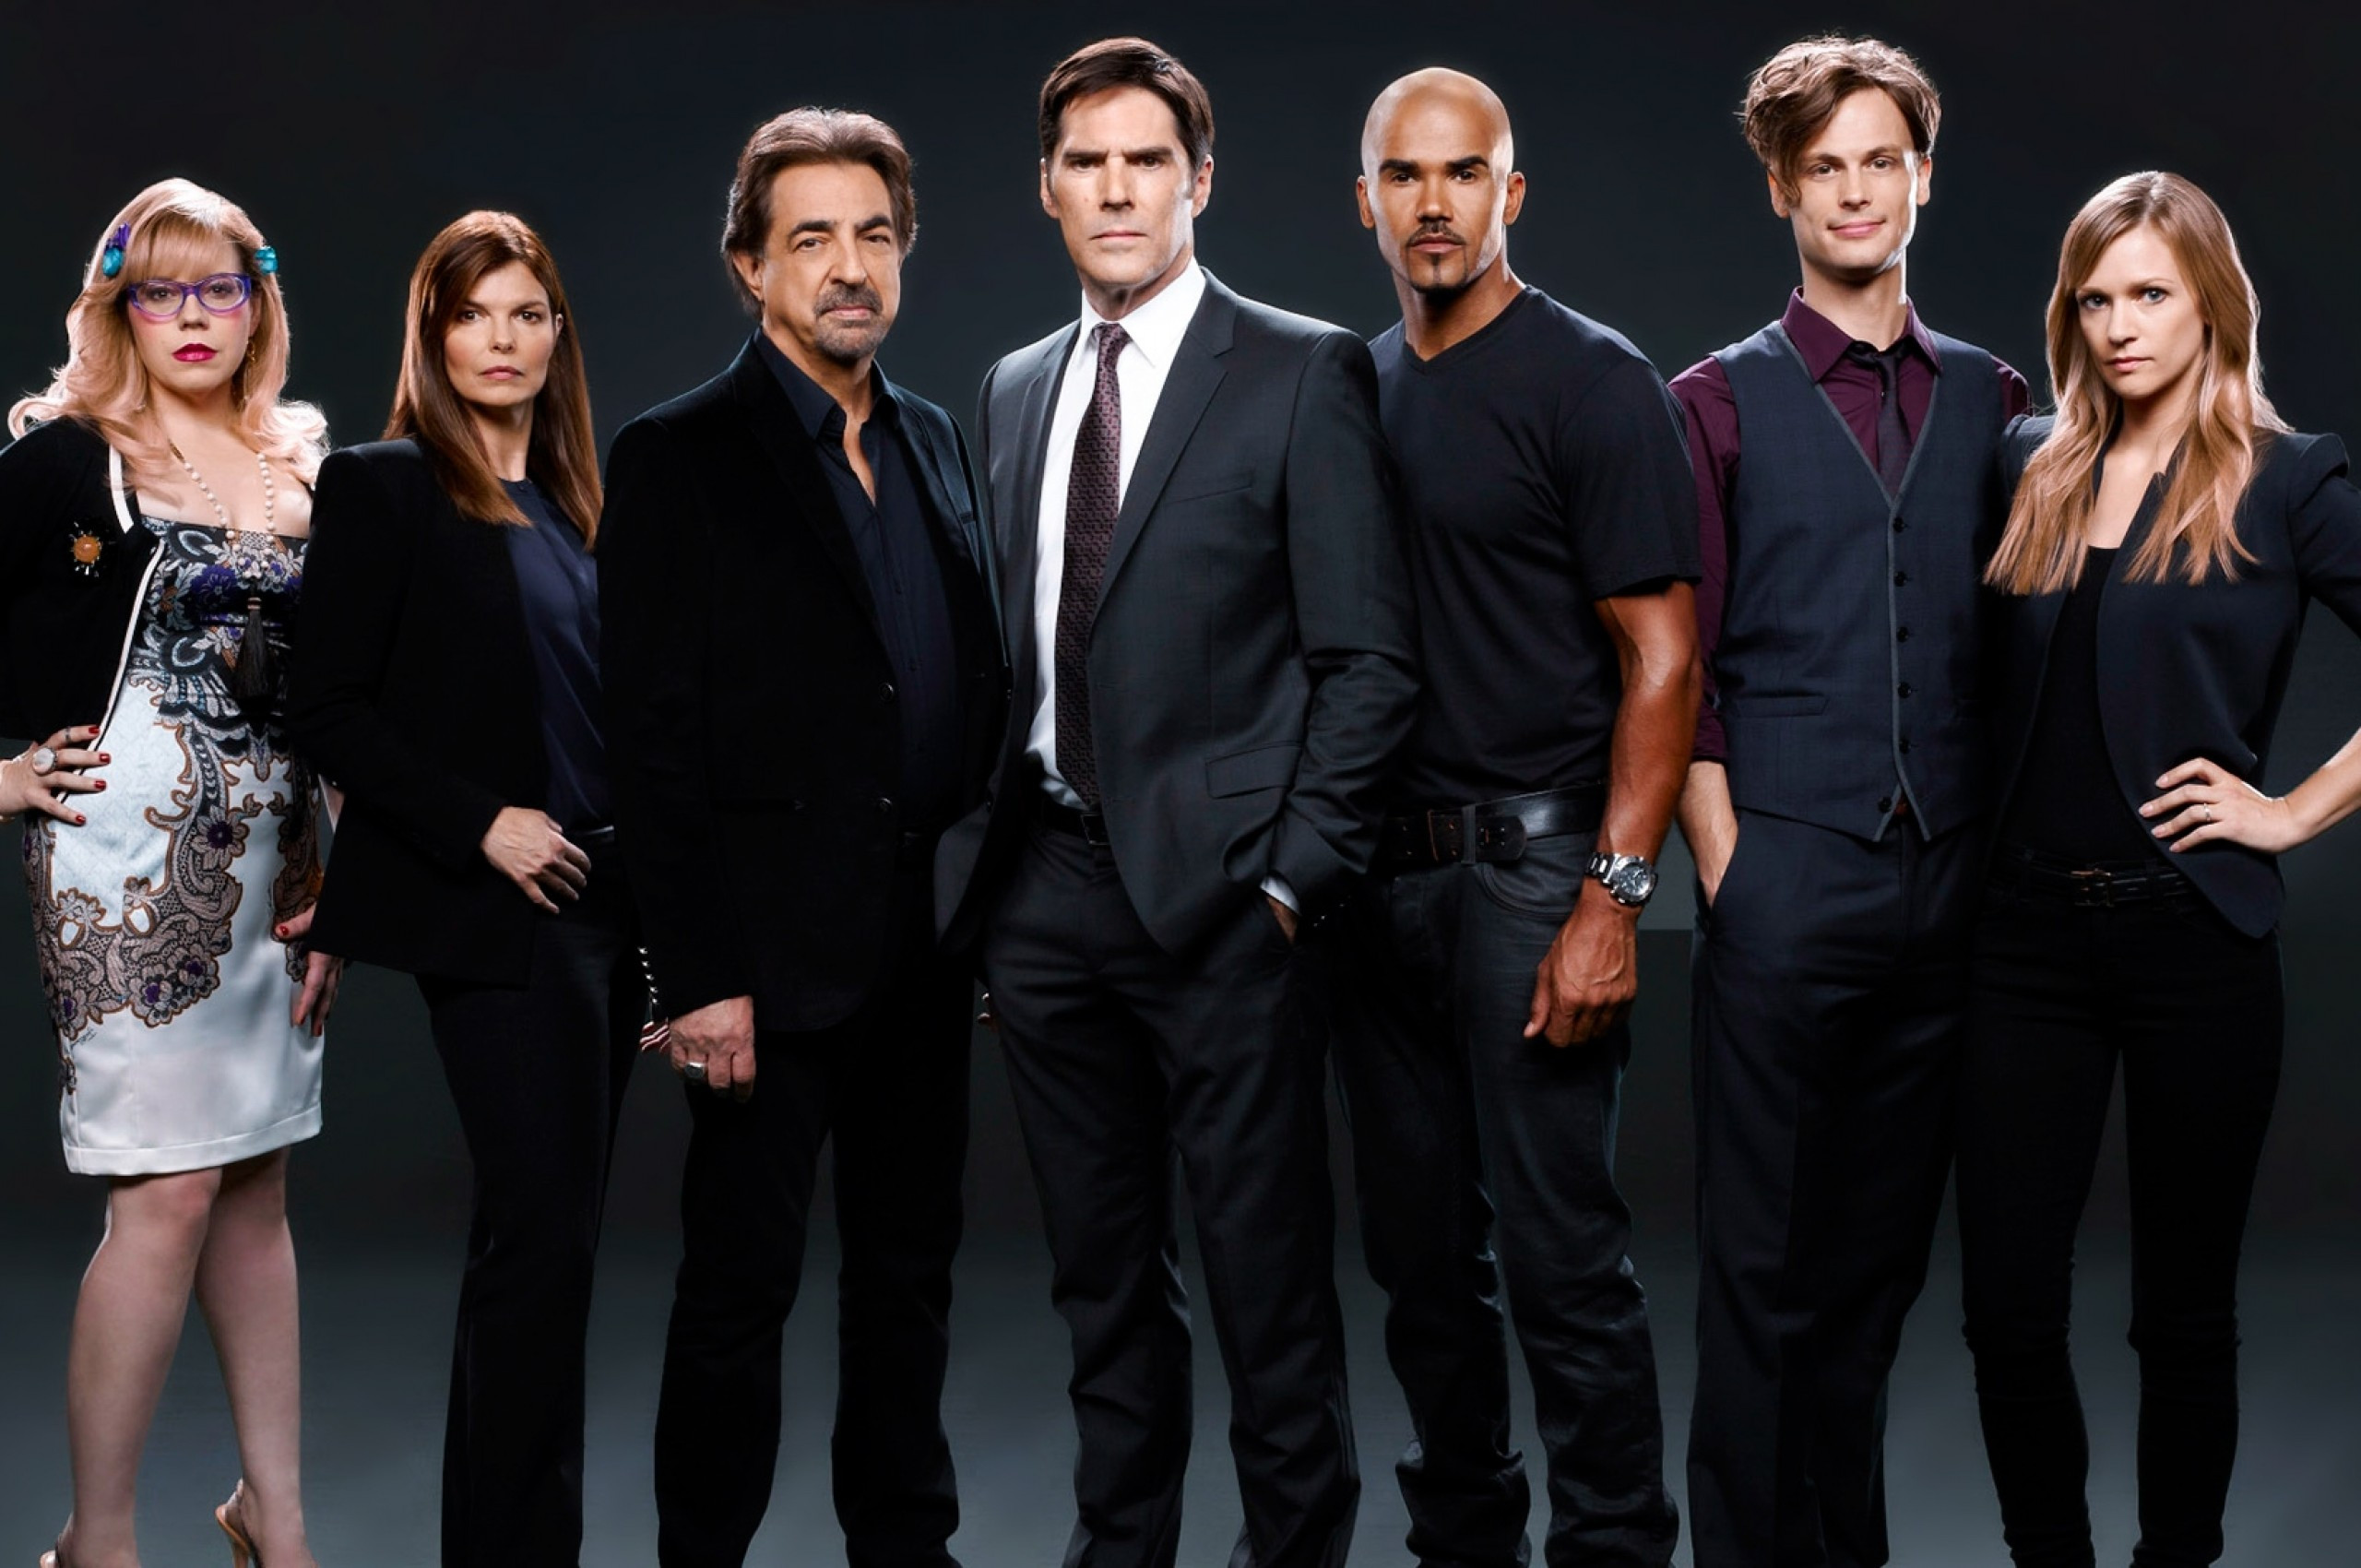 Download 2560x1700 Criminal Minds, Tv Series, Thomas Gibson Wallpaper for Chromebook Pixel